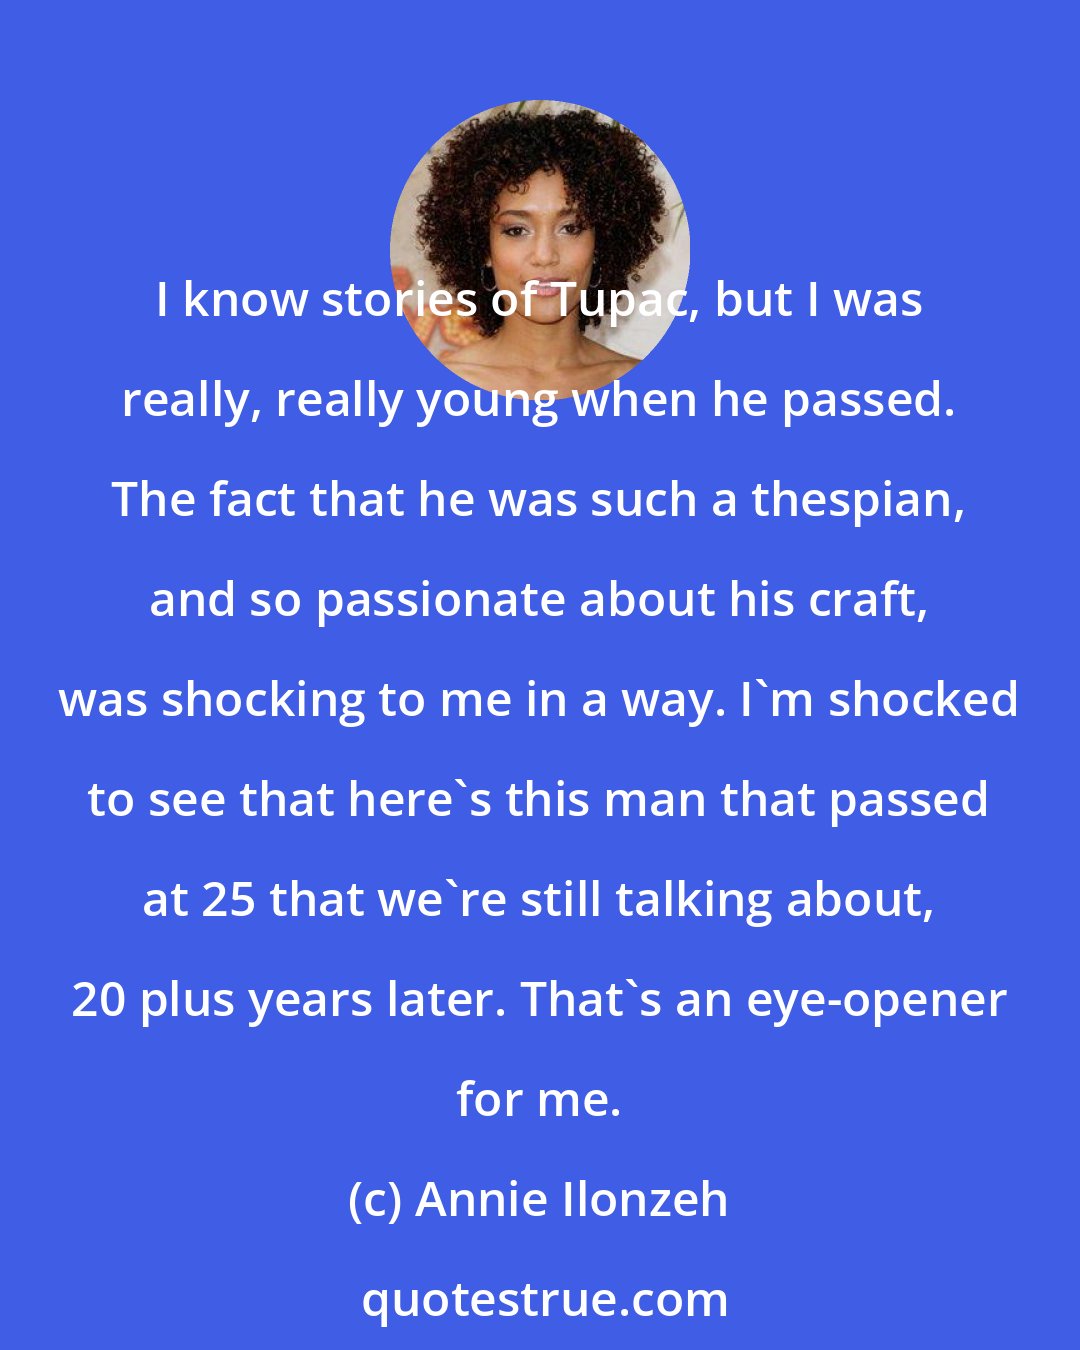 Annie Ilonzeh: I know stories of Tupac, but I was really, really young when he passed. The fact that he was such a thespian, and so passionate about his craft, was shocking to me in a way. I'm shocked to see that here's this man that passed at 25 that we're still talking about, 20 plus years later. That's an eye-opener for me.